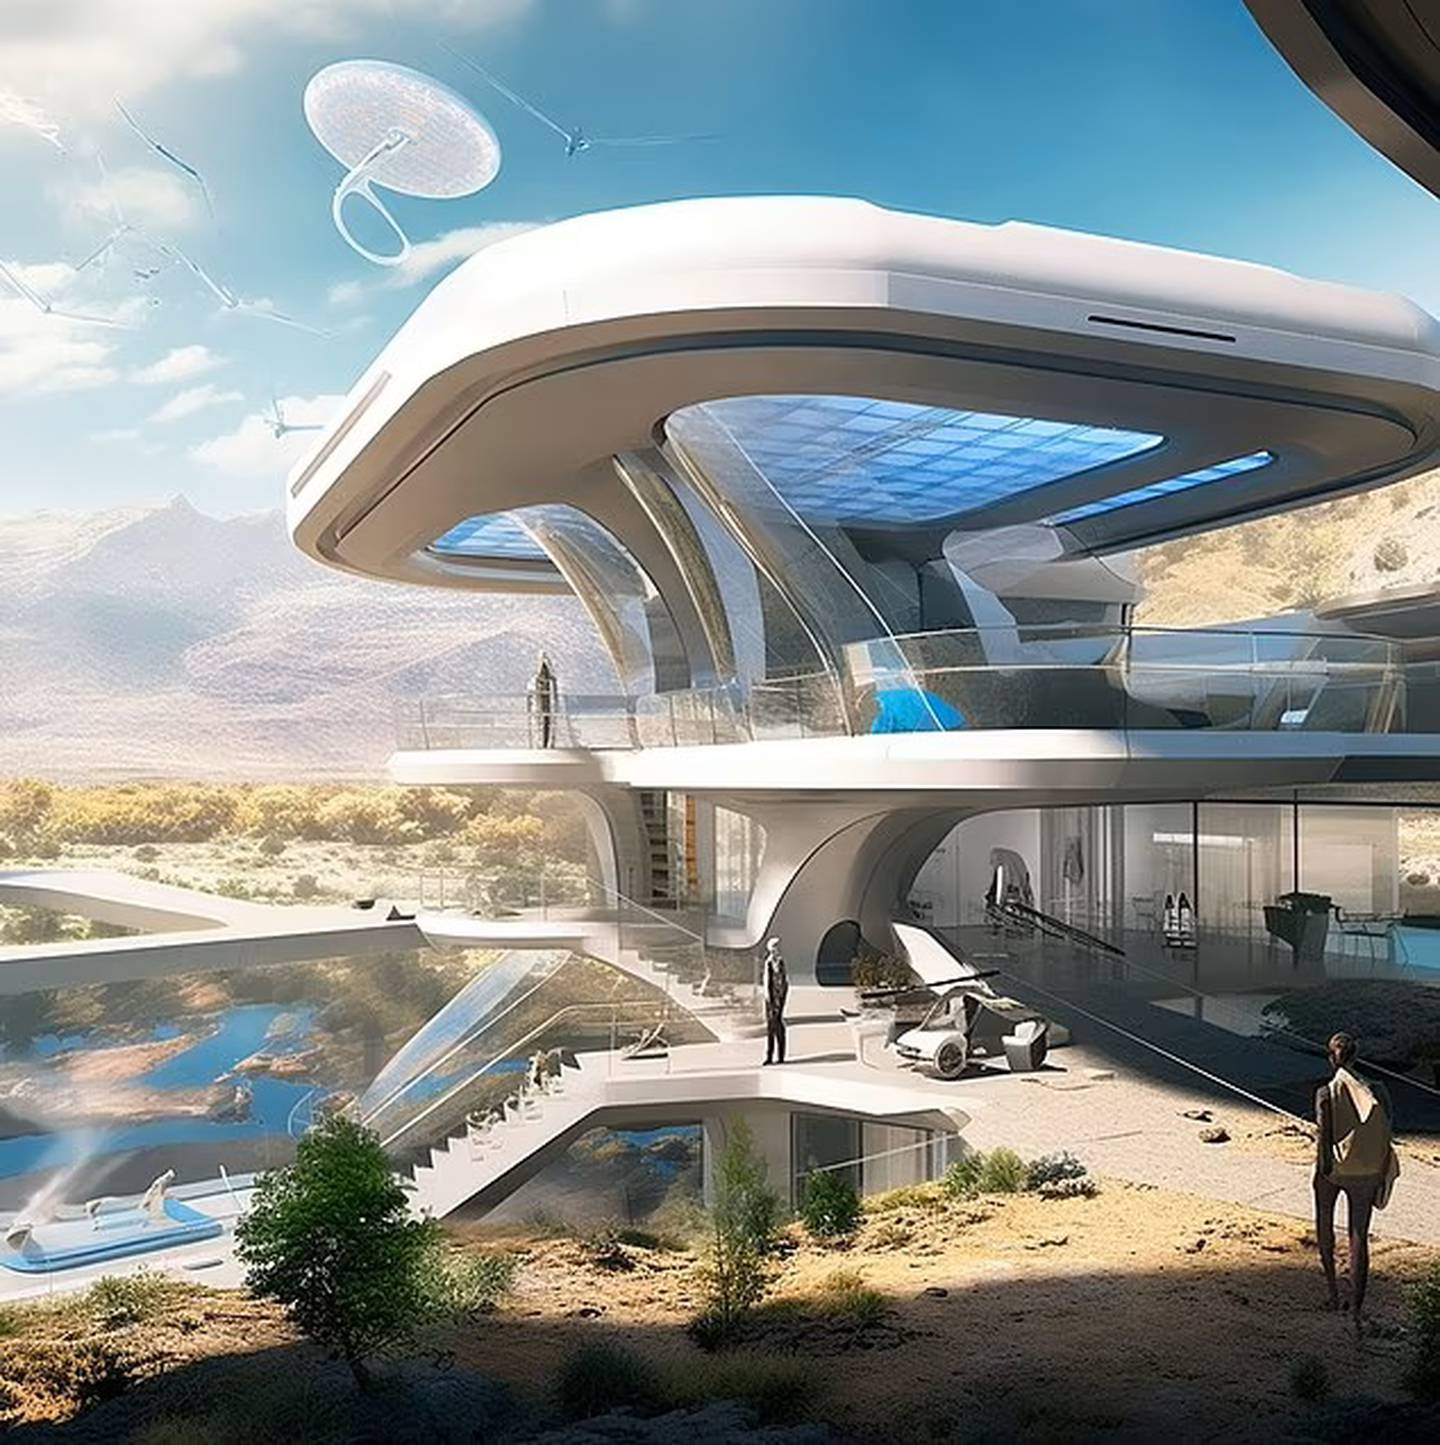 This will be the houses of the future